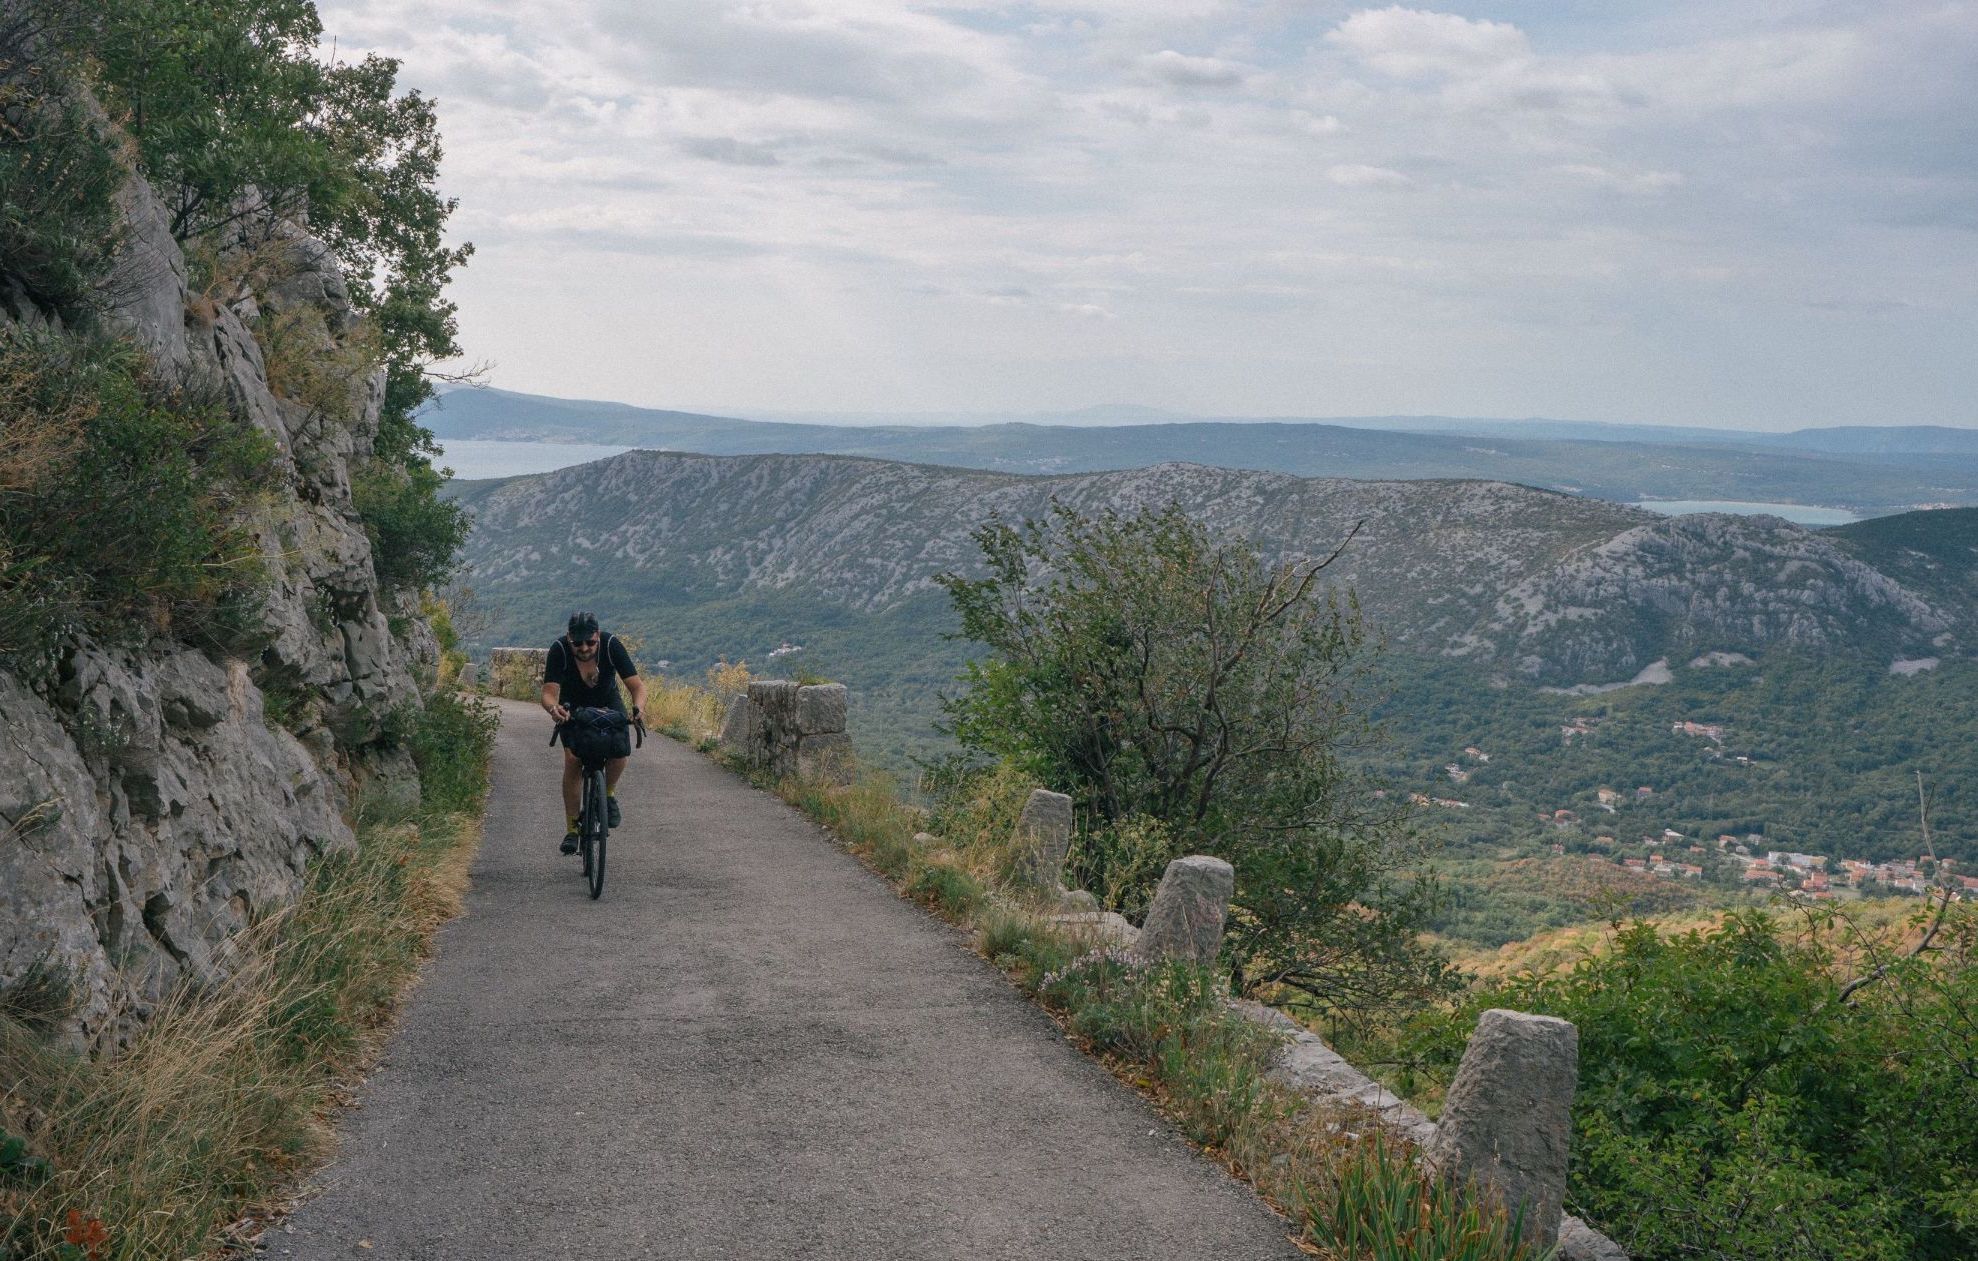 Jon Hickens of Restrap makes his way up a scenic climb on a bikepacking adventure in Croatia. Photo: Restrap